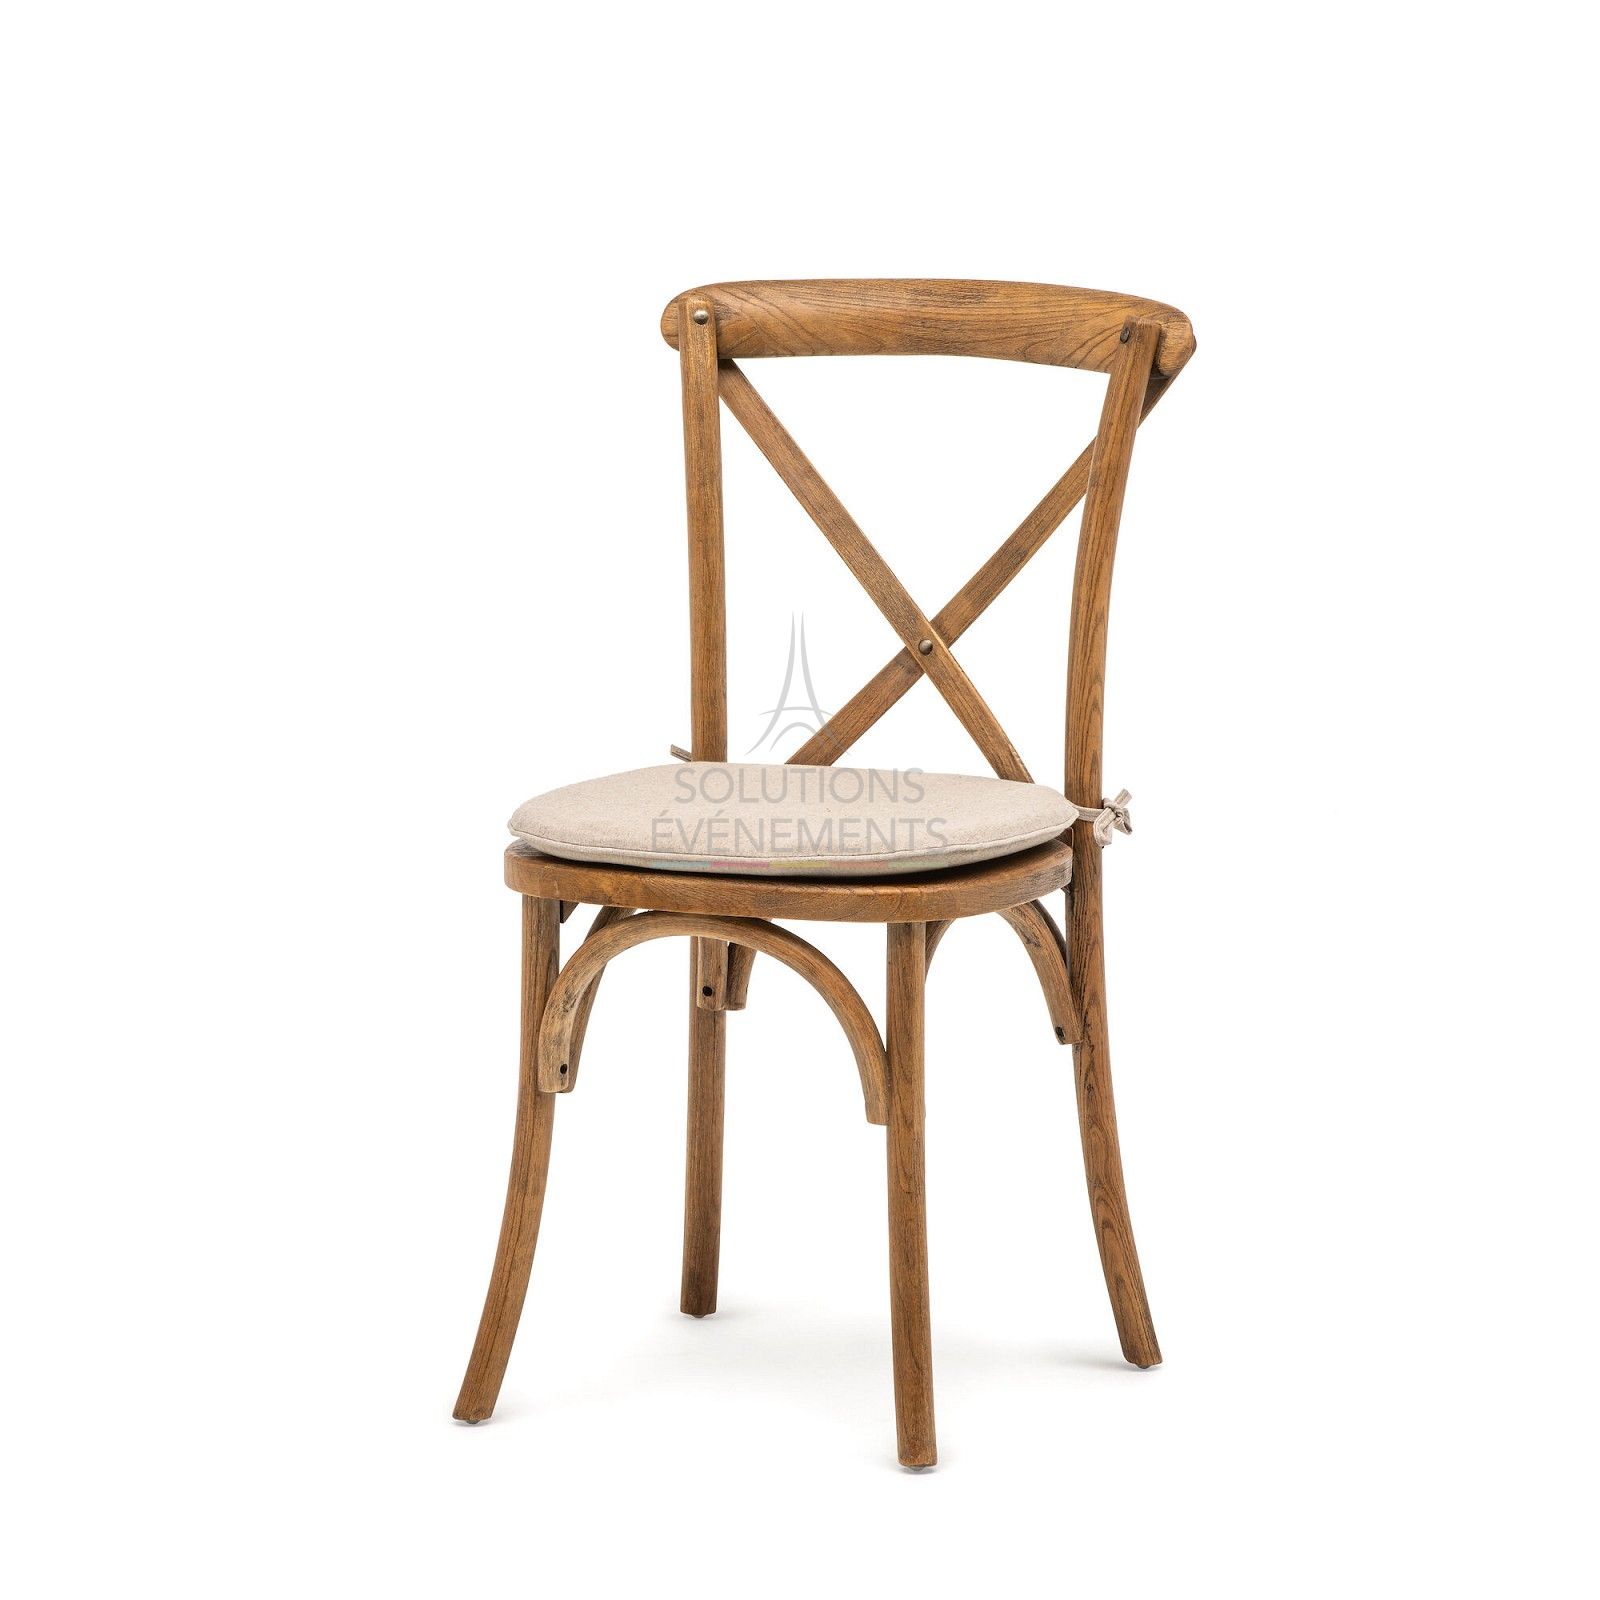 Rental quality chair with wooden cross back and soft M1 cushion.